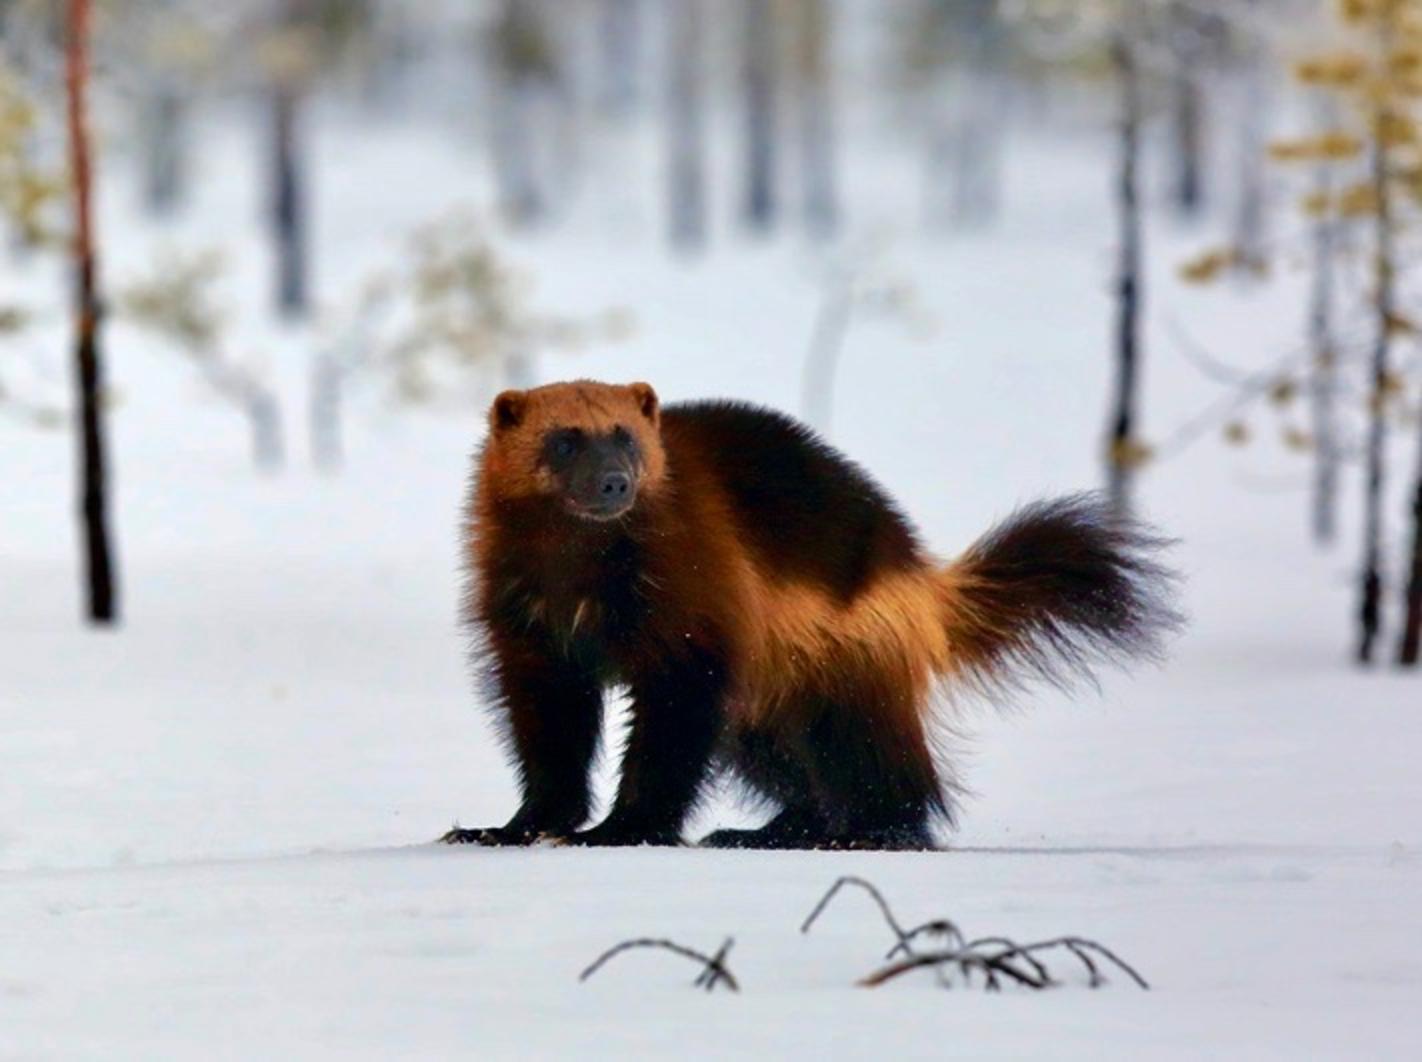 A wolverine in wintry habitat. Photo courtesy National Oceanic and Atmospheric Association